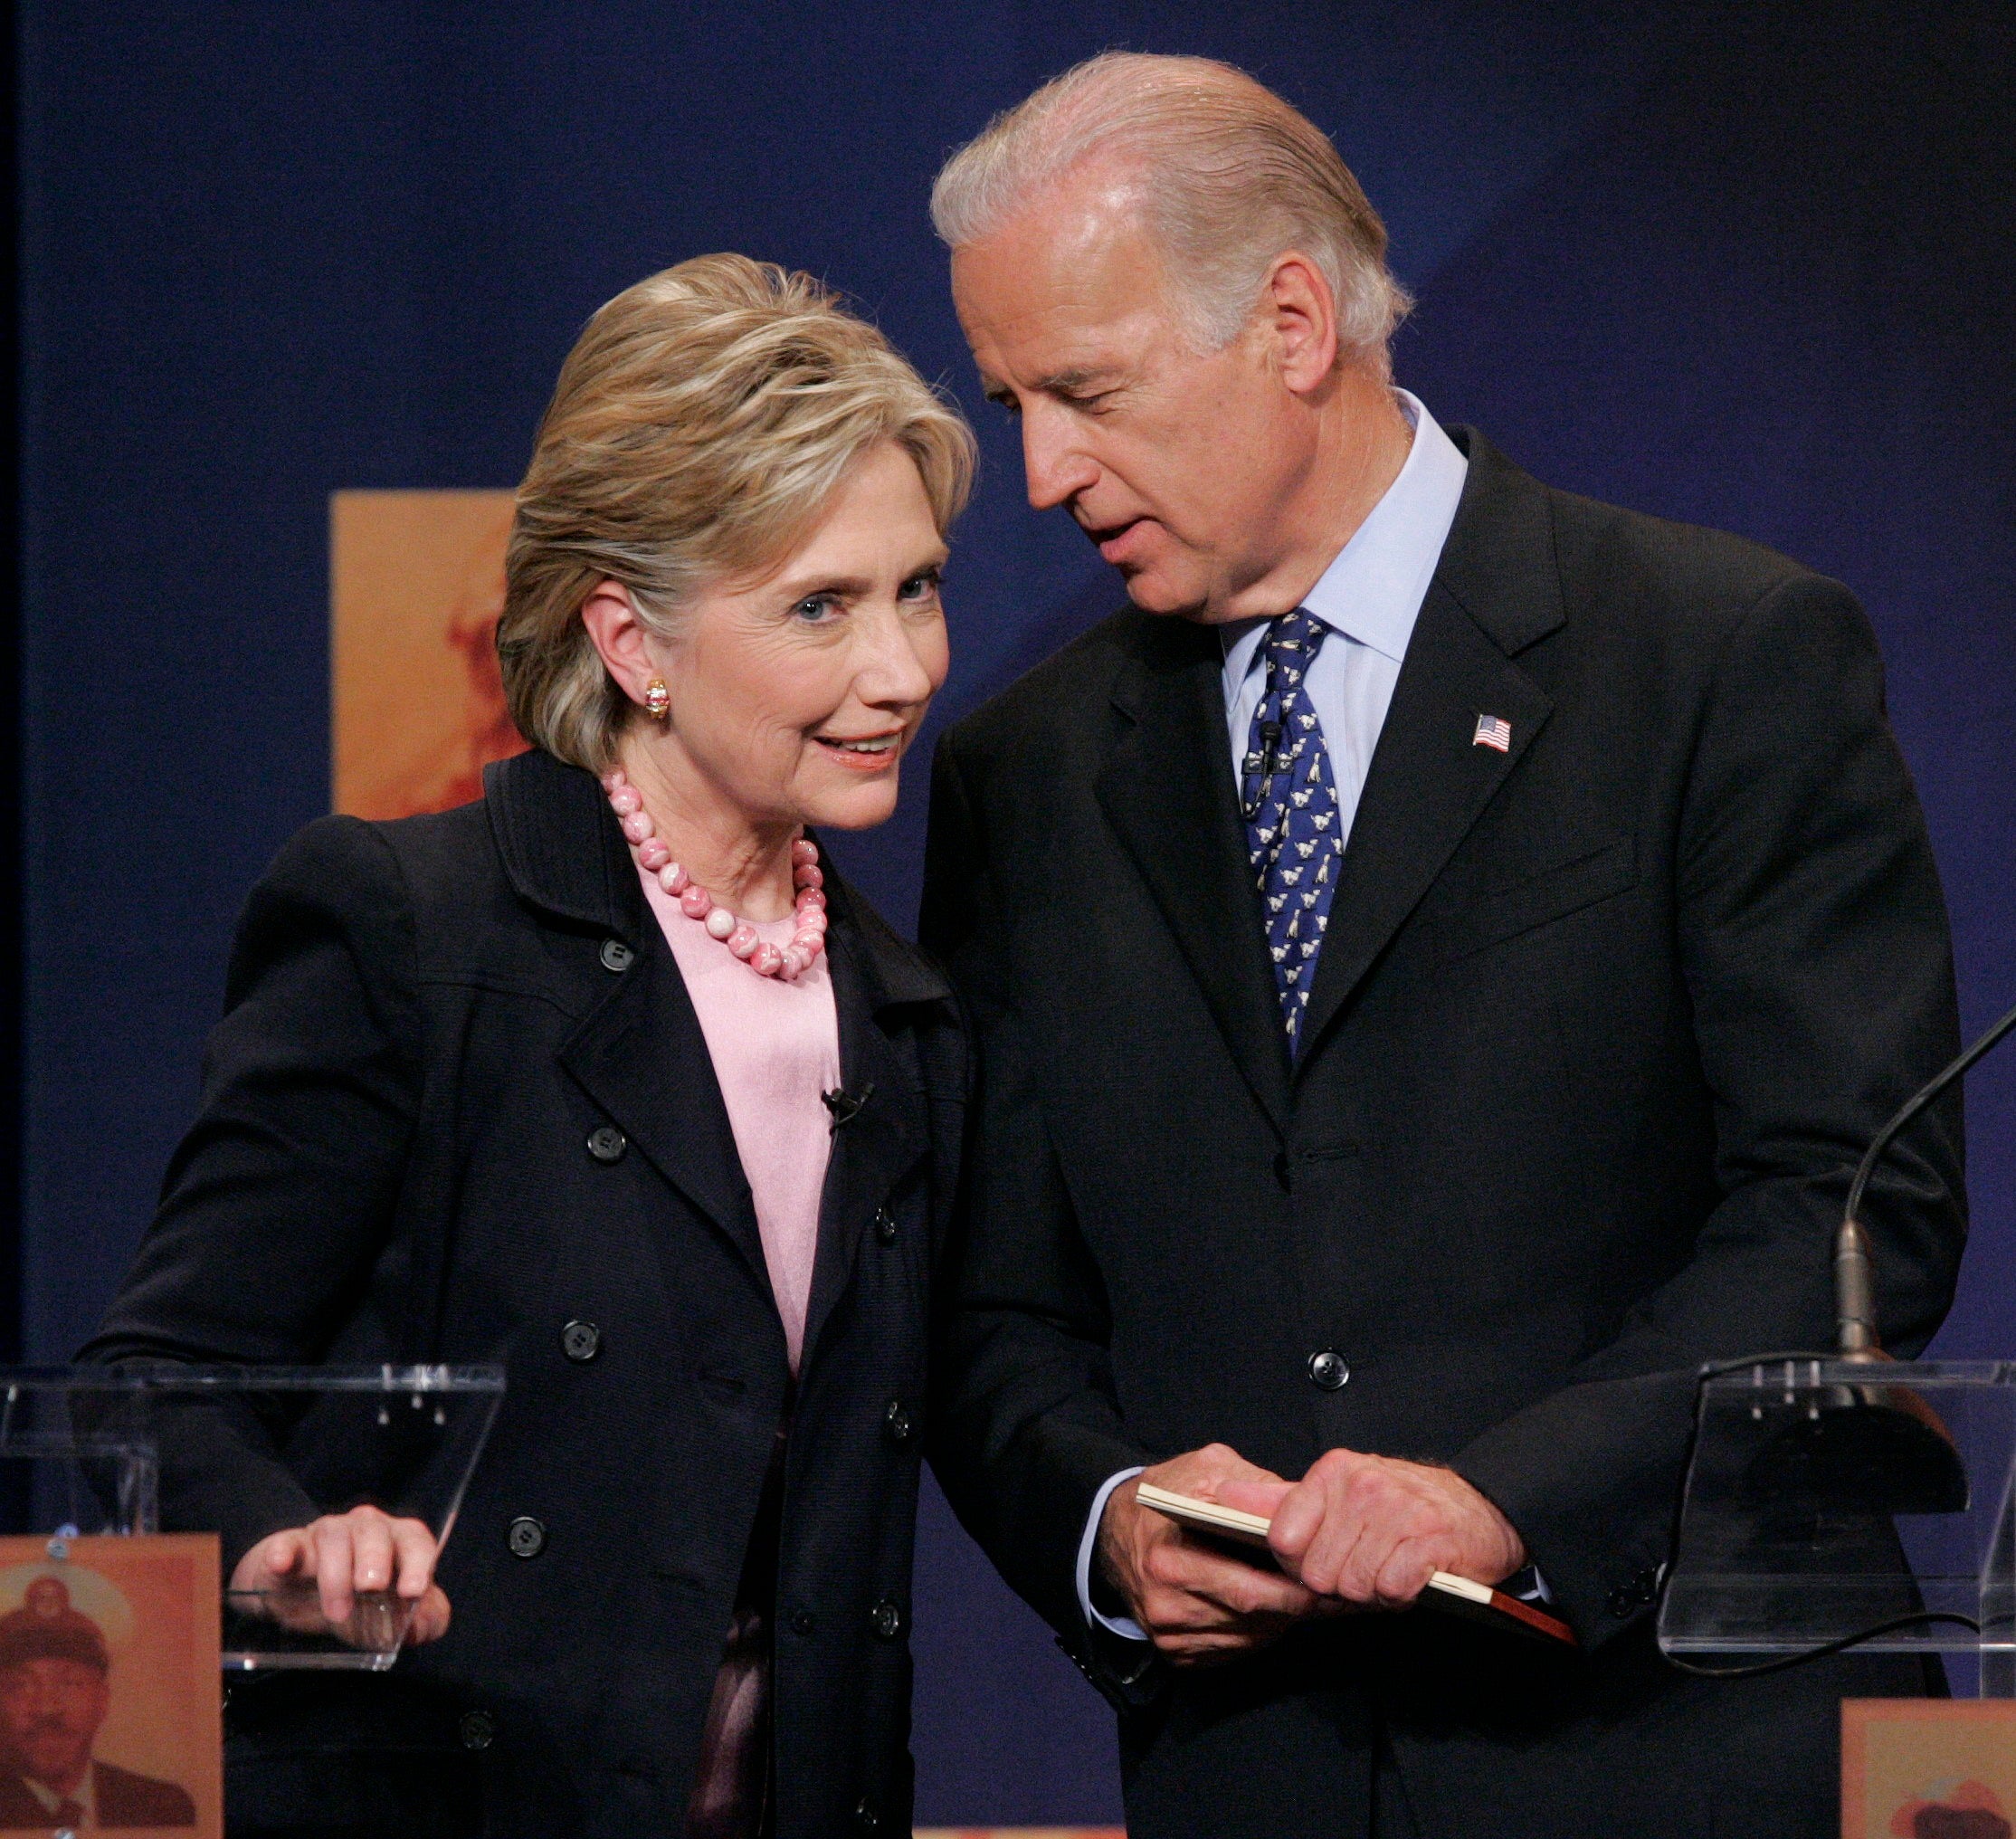 Clinton participated in debates with both Biden and Trump. She is seen here in a Democratic primary debate with Biden ahead of the 2008 election